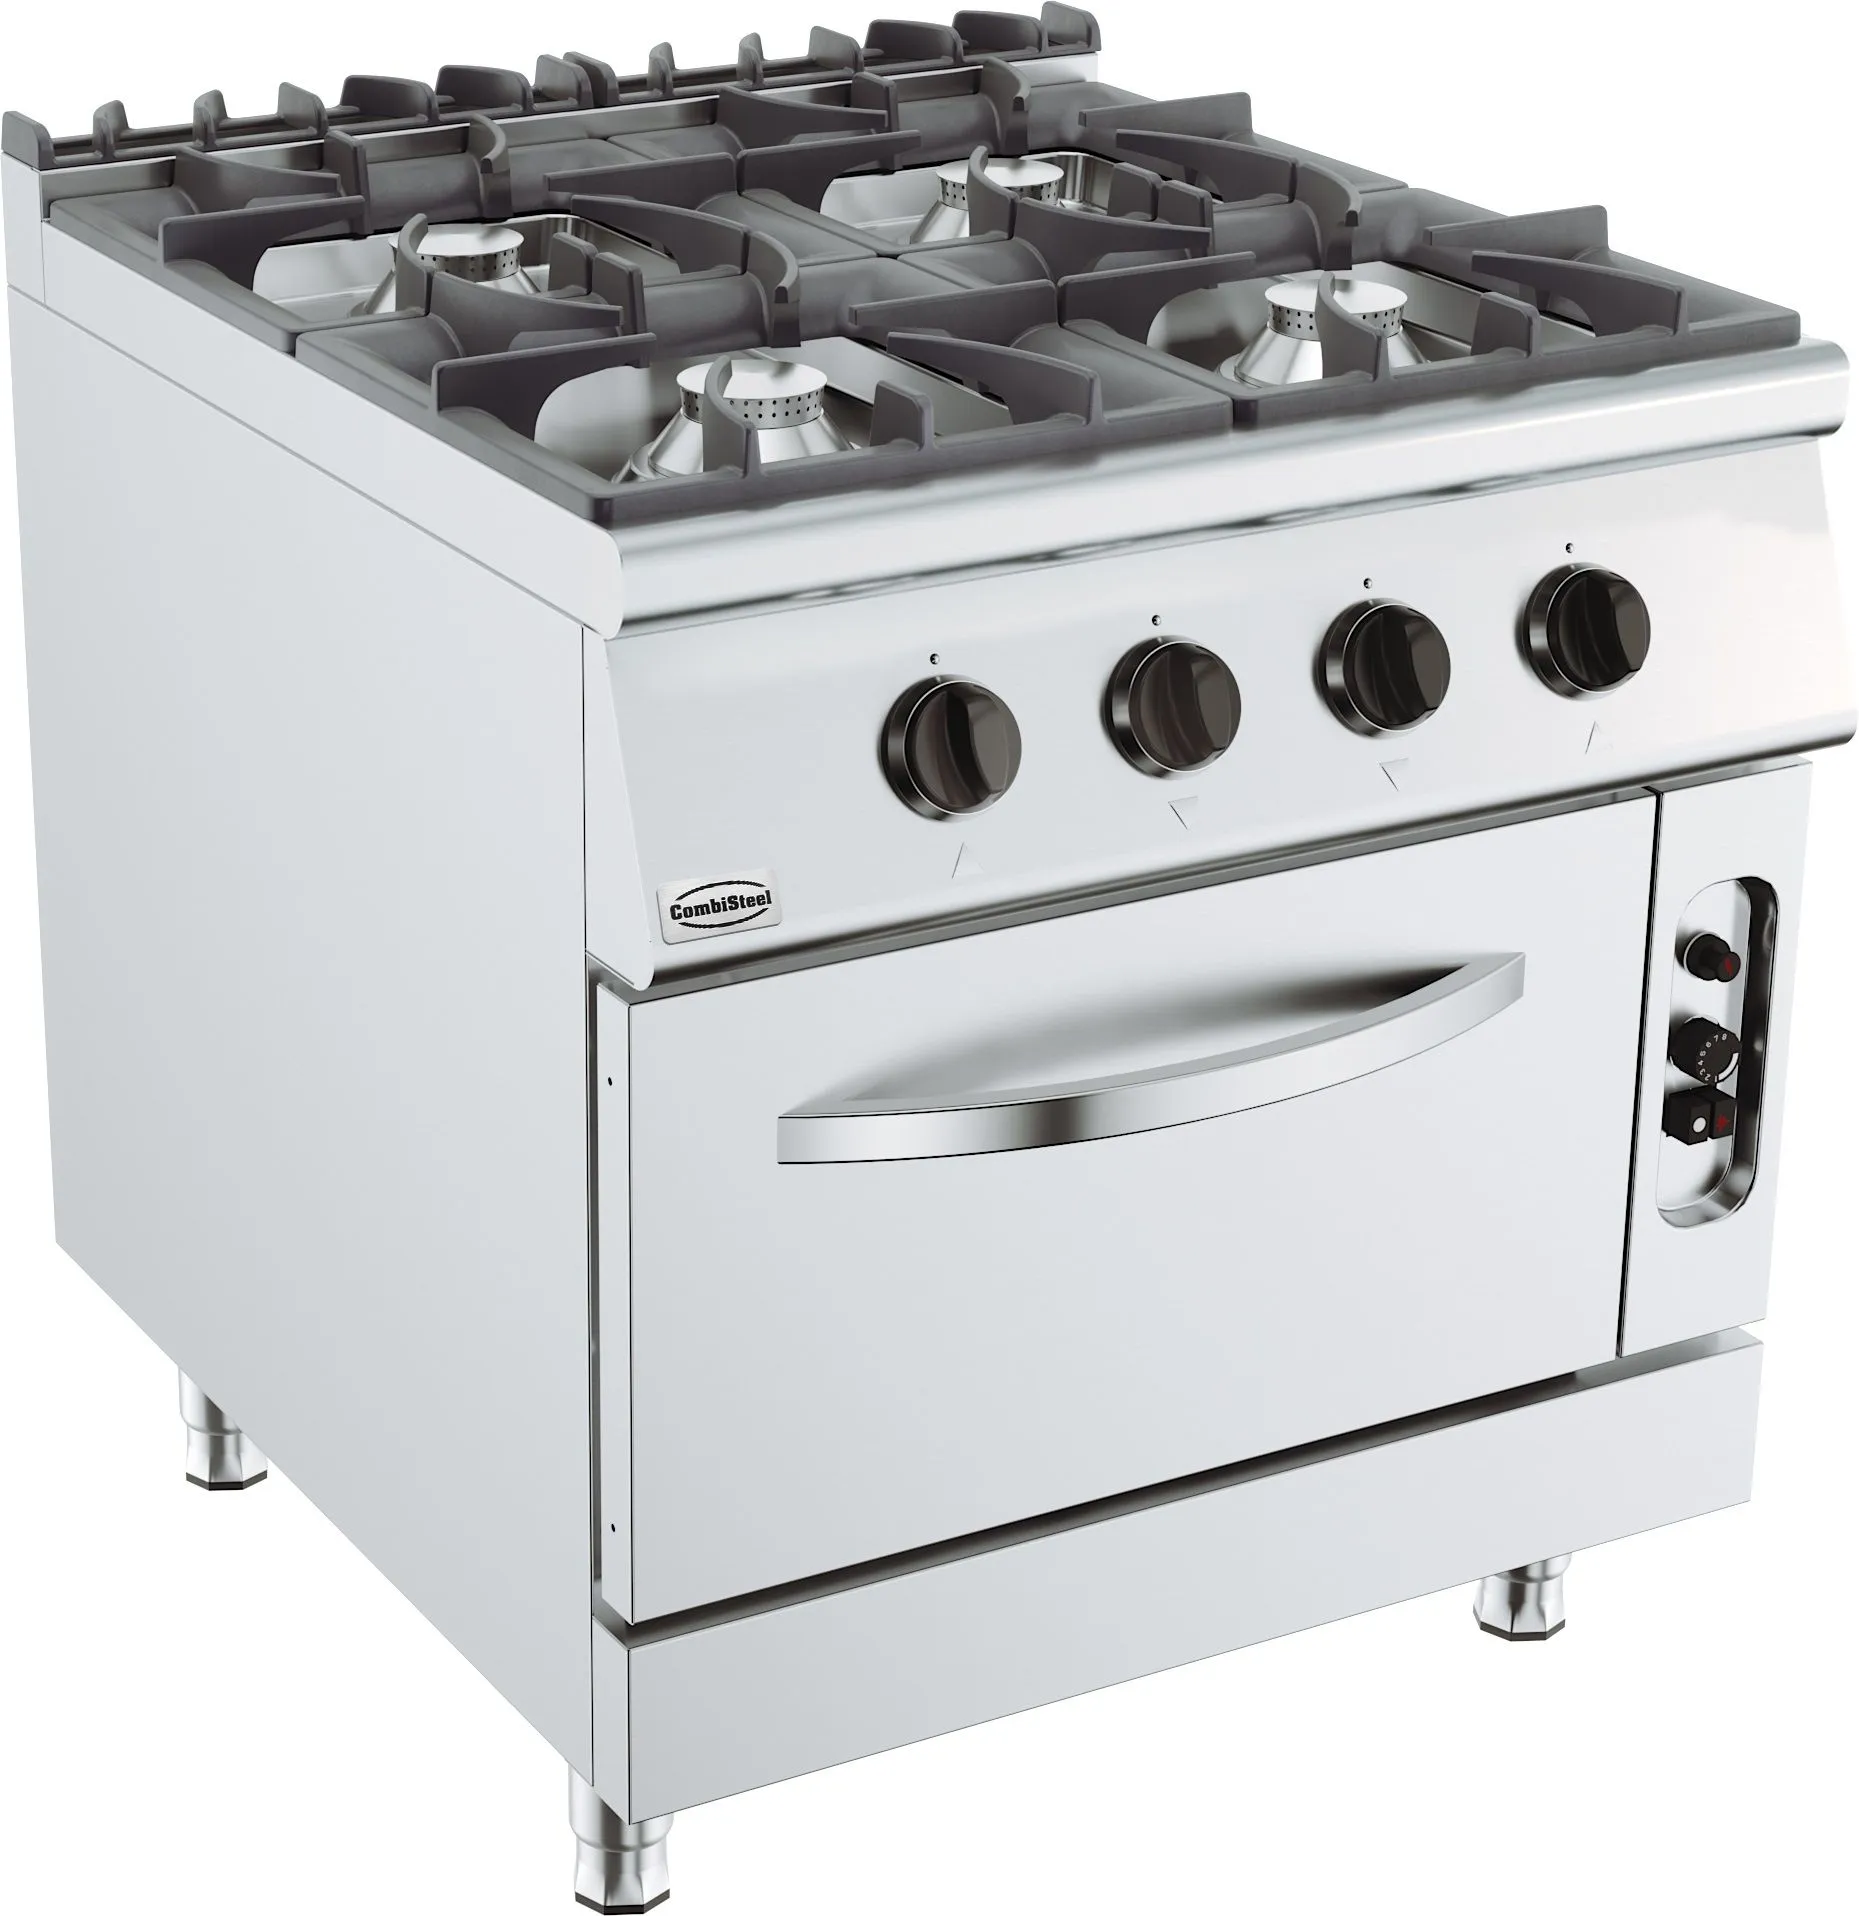 CombiSteel Base 900 Freestanding Gas Stove 4 Burner With Gas Oven